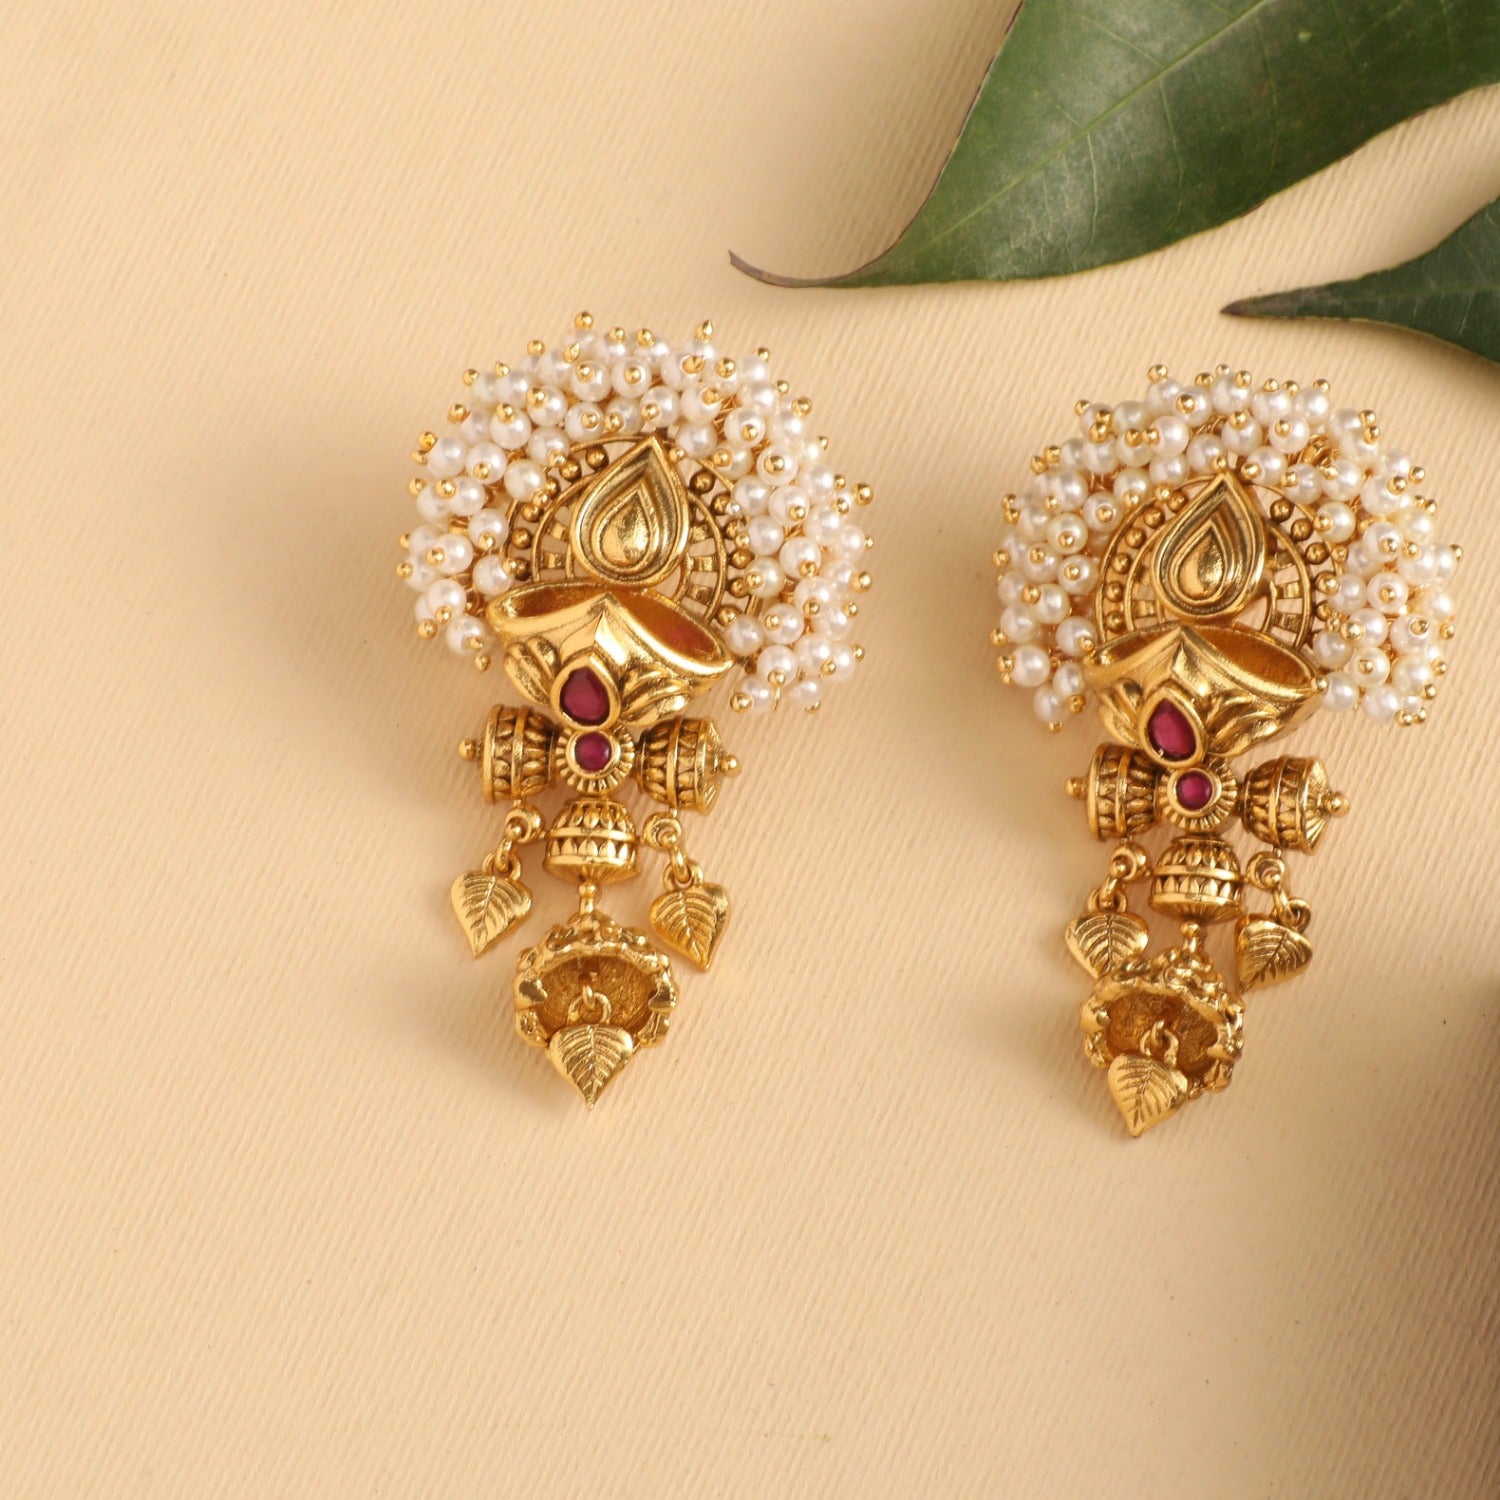 Aggregate 145+ statement earrings online india best